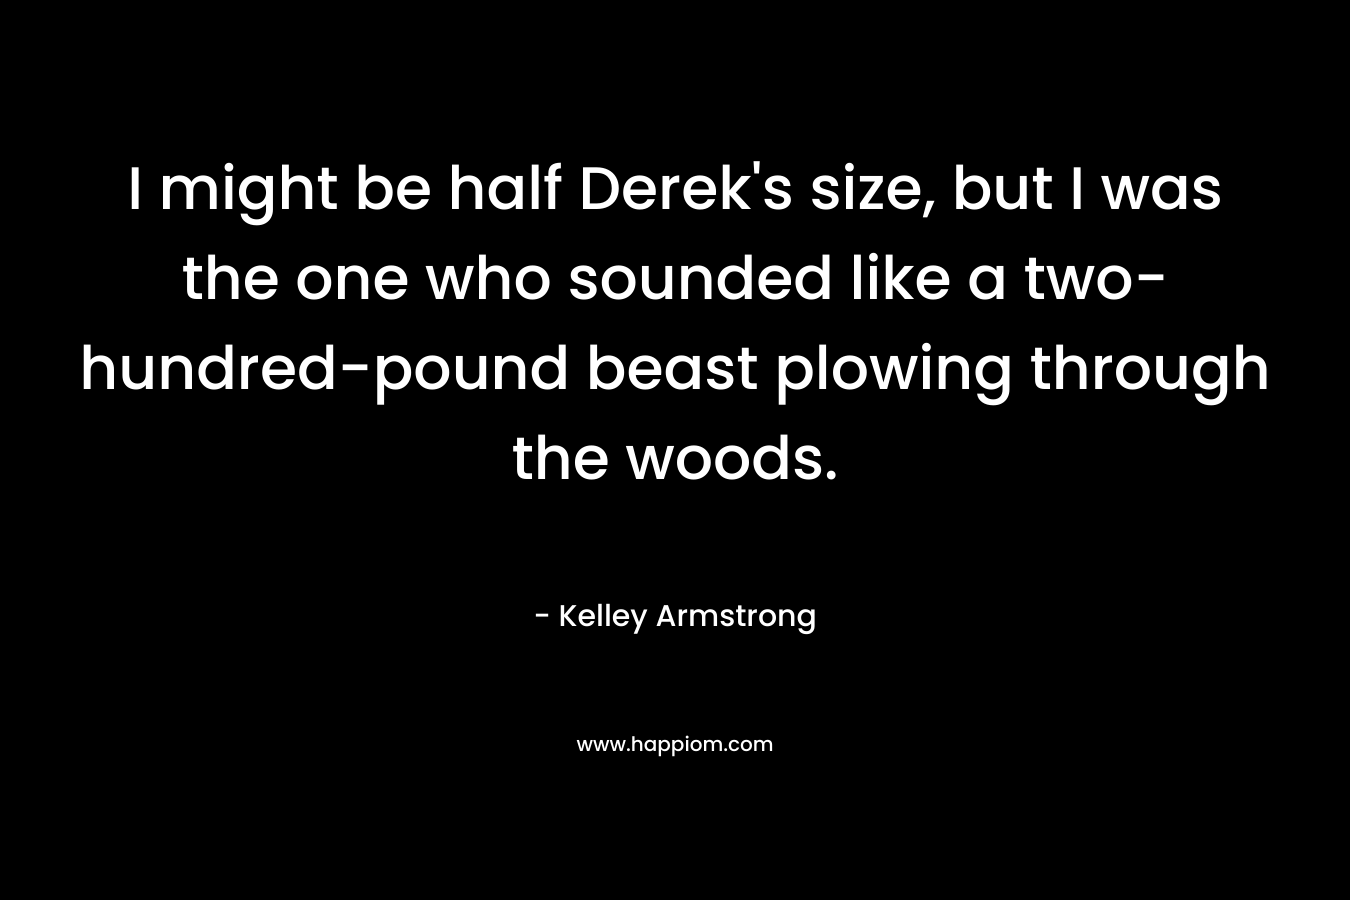 I might be half Derek's size, but I was the one who sounded like a two-hundred-pound beast plowing through the woods.